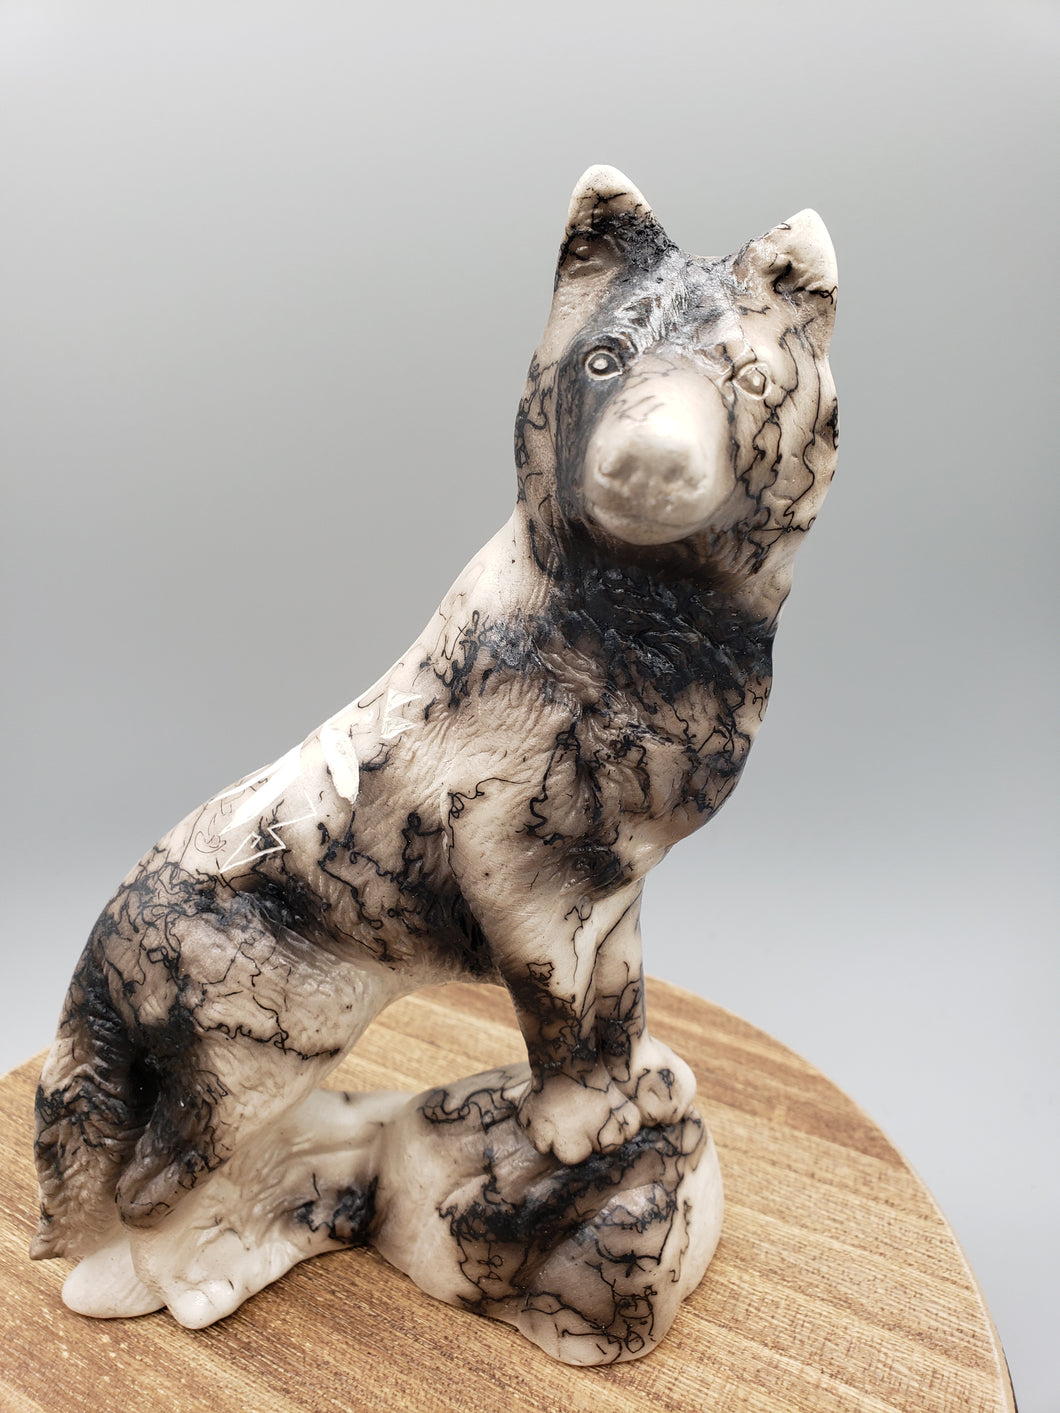 HORSEHAIR POTTERY STATUE - WOLF - TOM VAIL JR/JESSICA VAIL